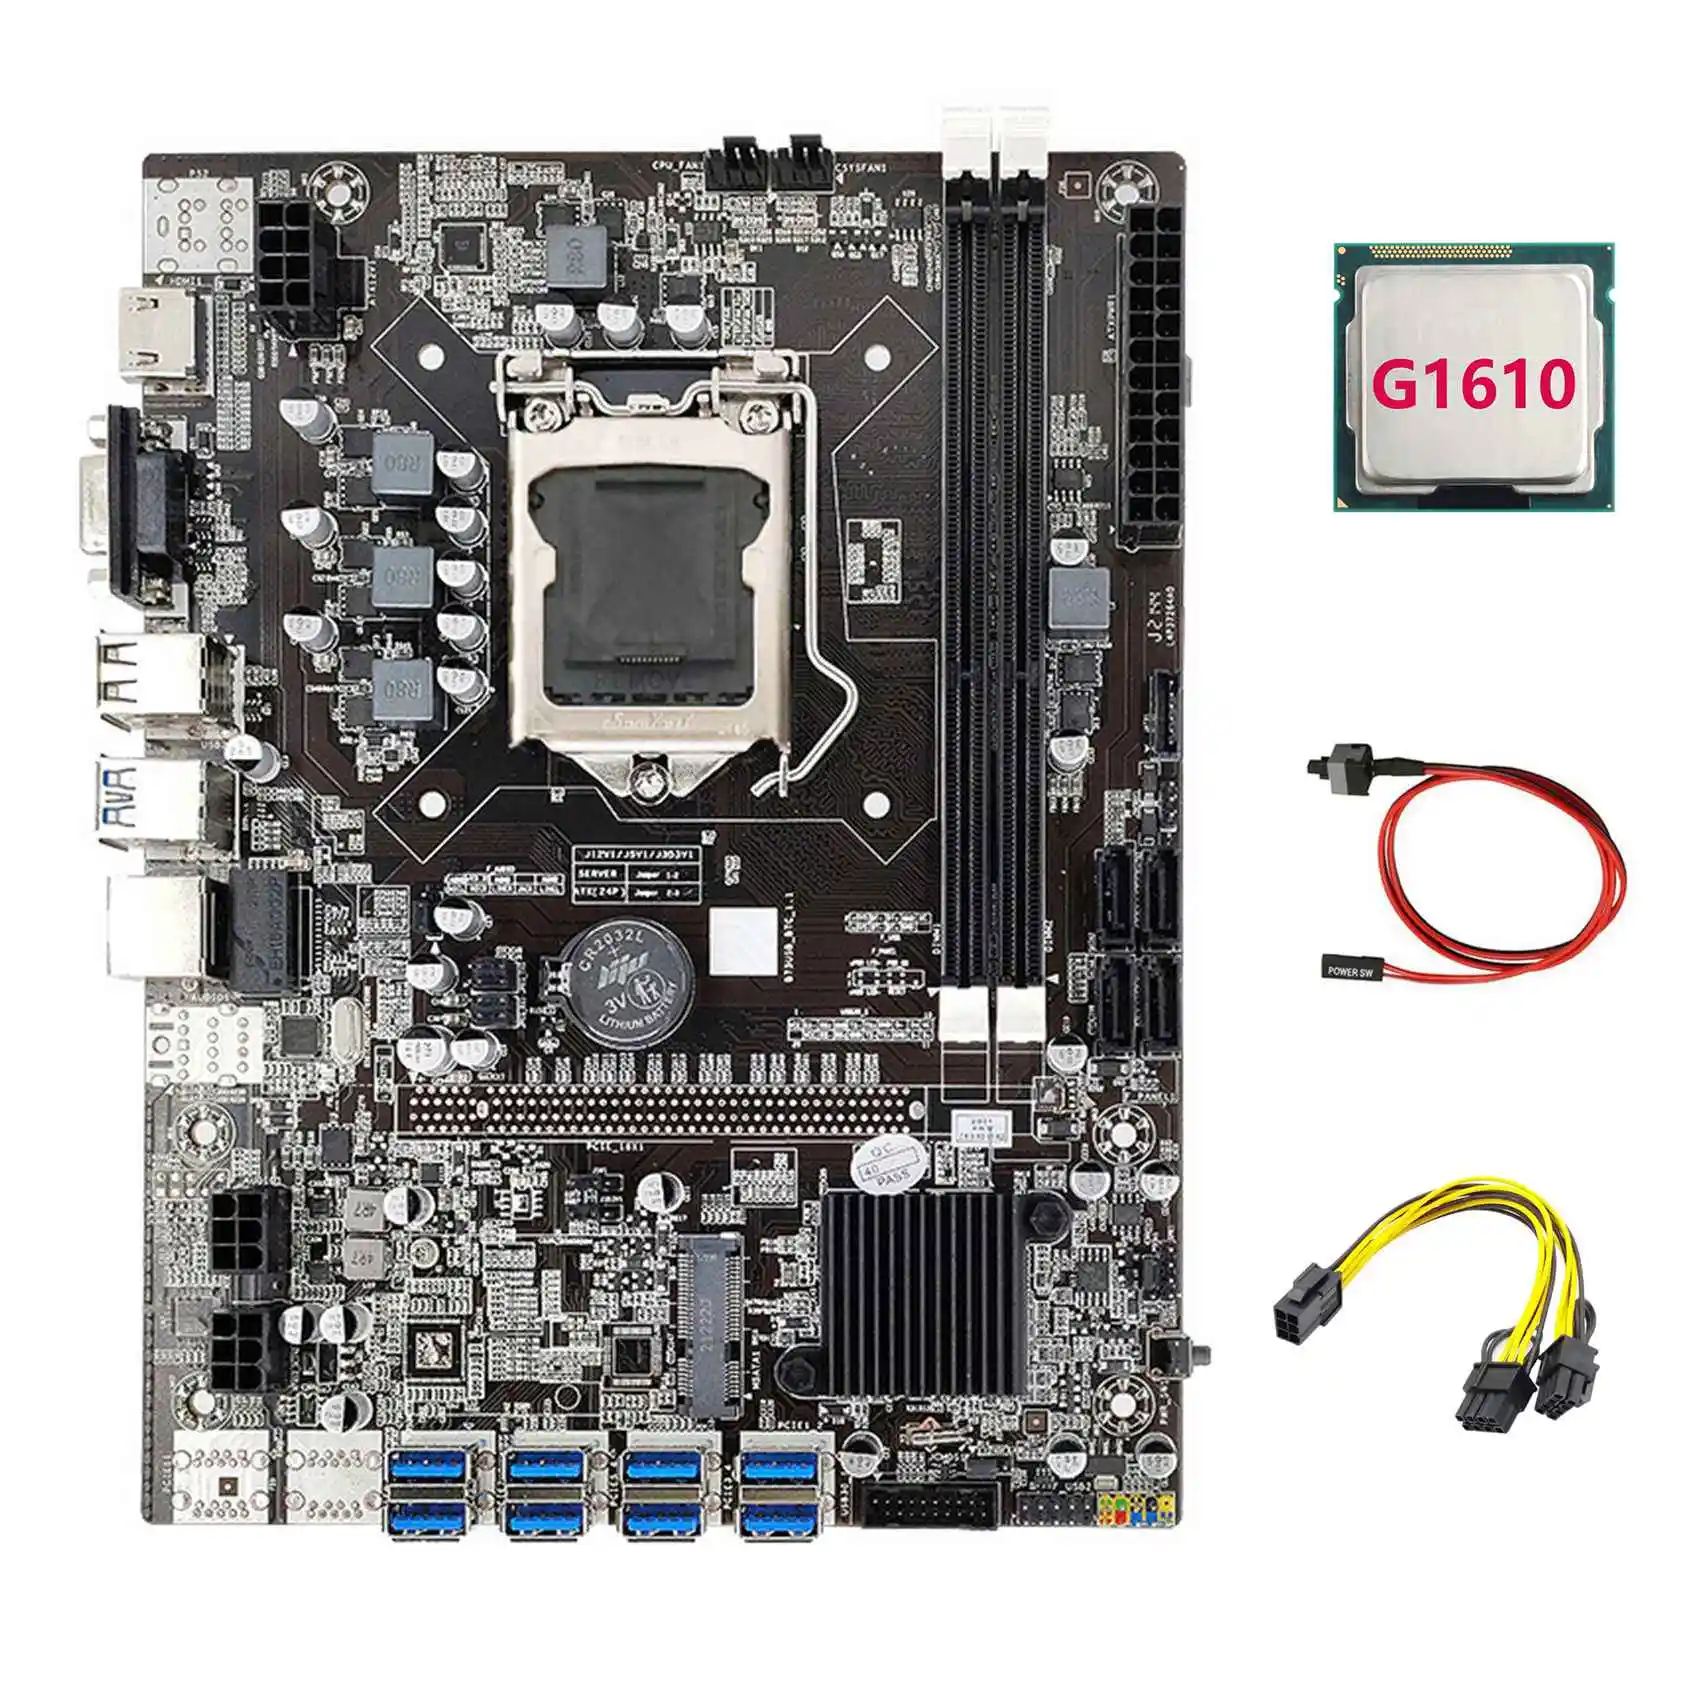 B75 ETH Mining Motherboard 8XPCIE to USB+G1610 CPU+6Pin to Dual 8Pin Cable+Switch Cable LGA1155 B75 Miner Motherboard